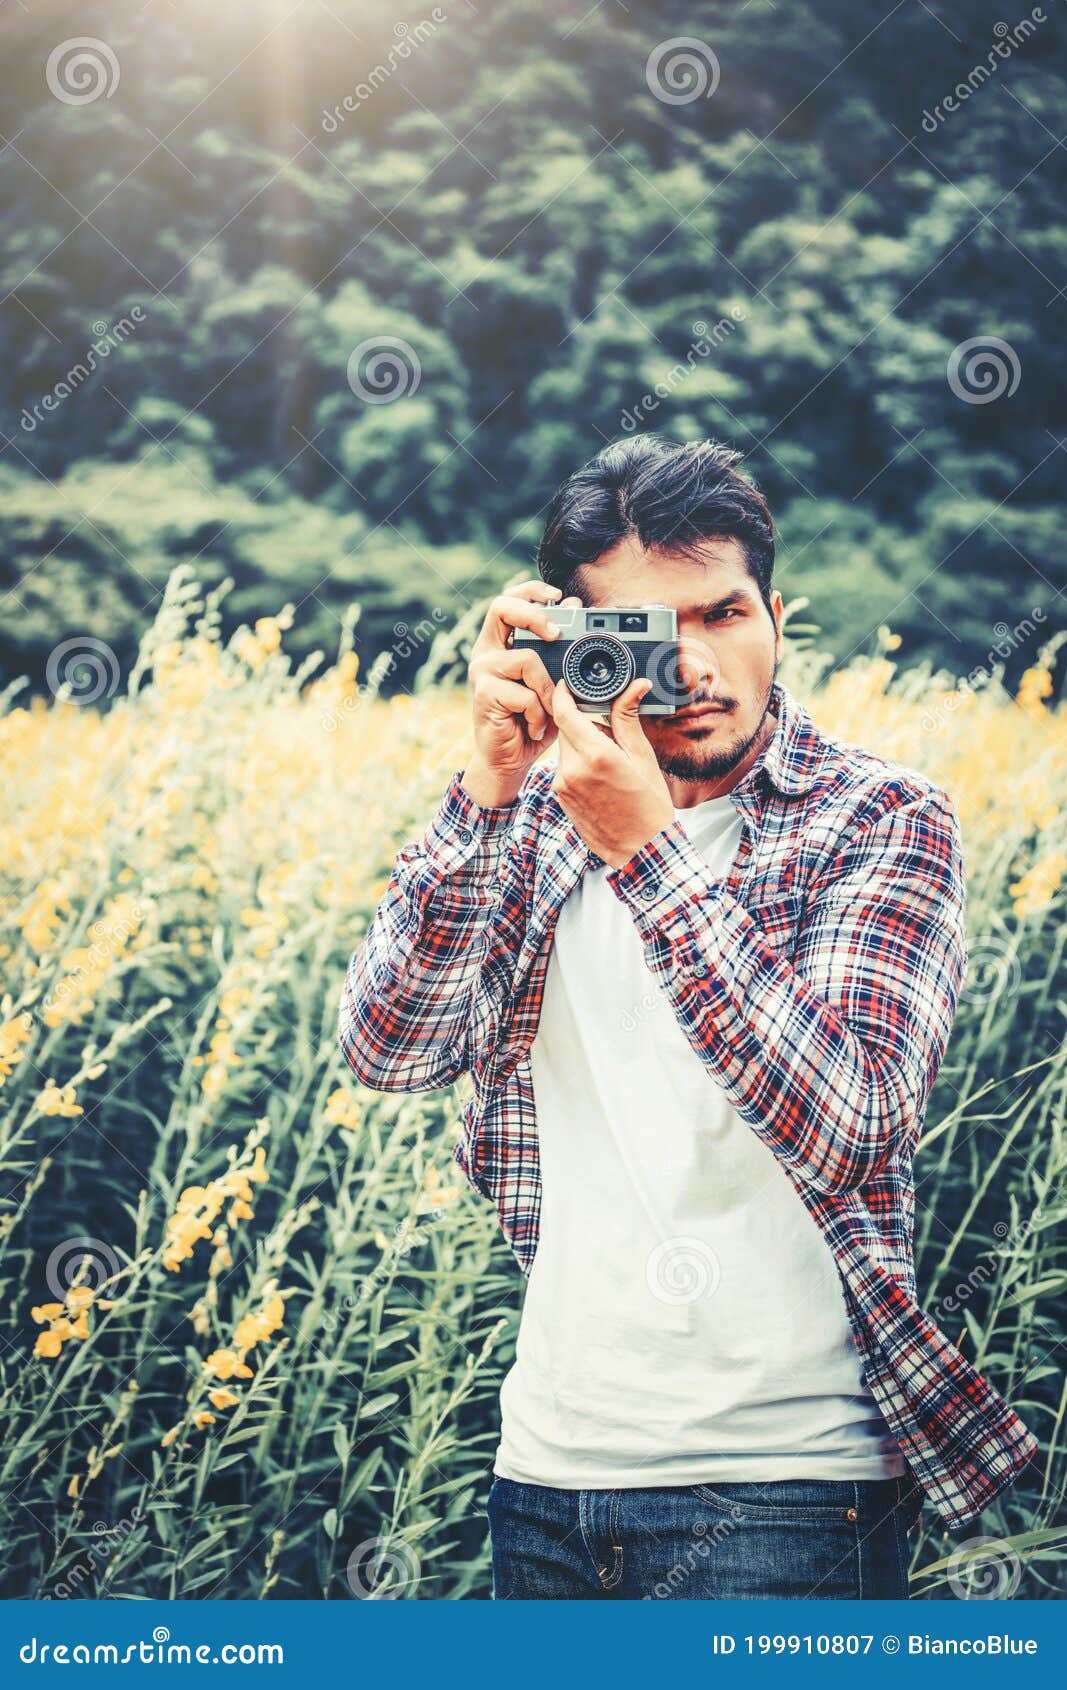 Image of Young Indian Boy Clicking Photos From His Dslr Camera With Blue  Sky In The Background.-AY556981-Picxy